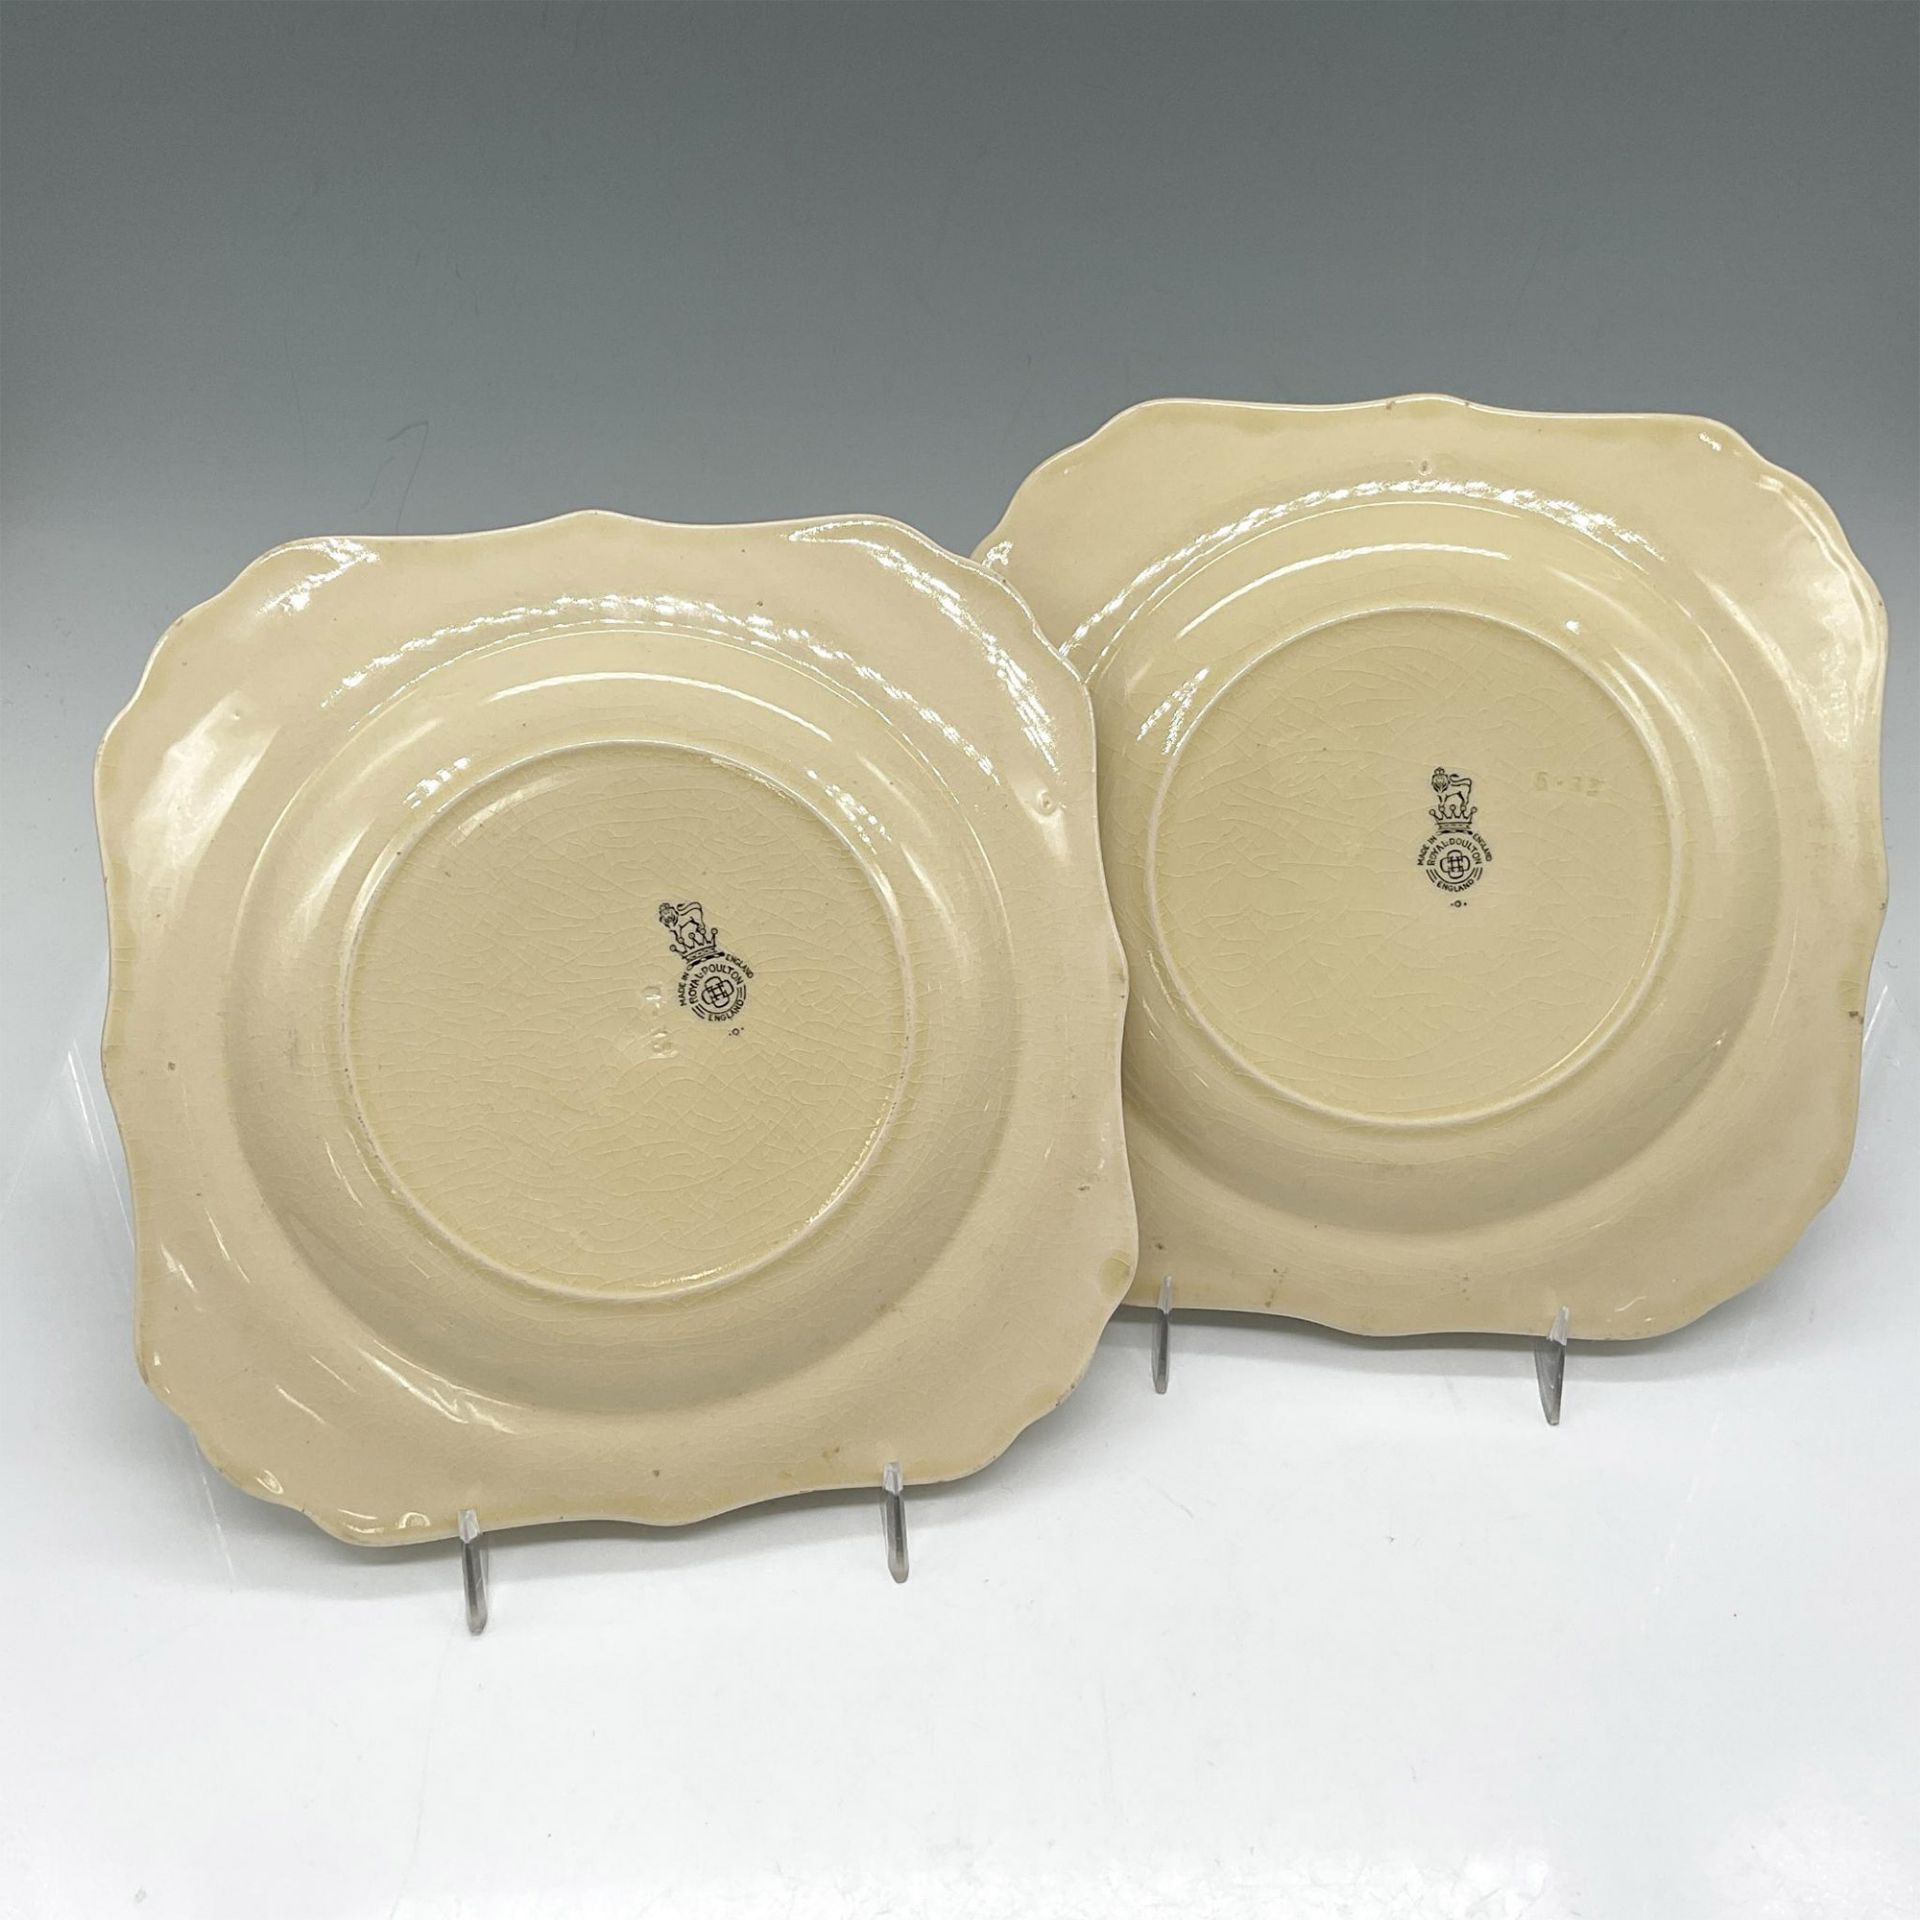 2pc Royal Doulton Series Ware Plates, Dog's Heads - Image 3 of 3